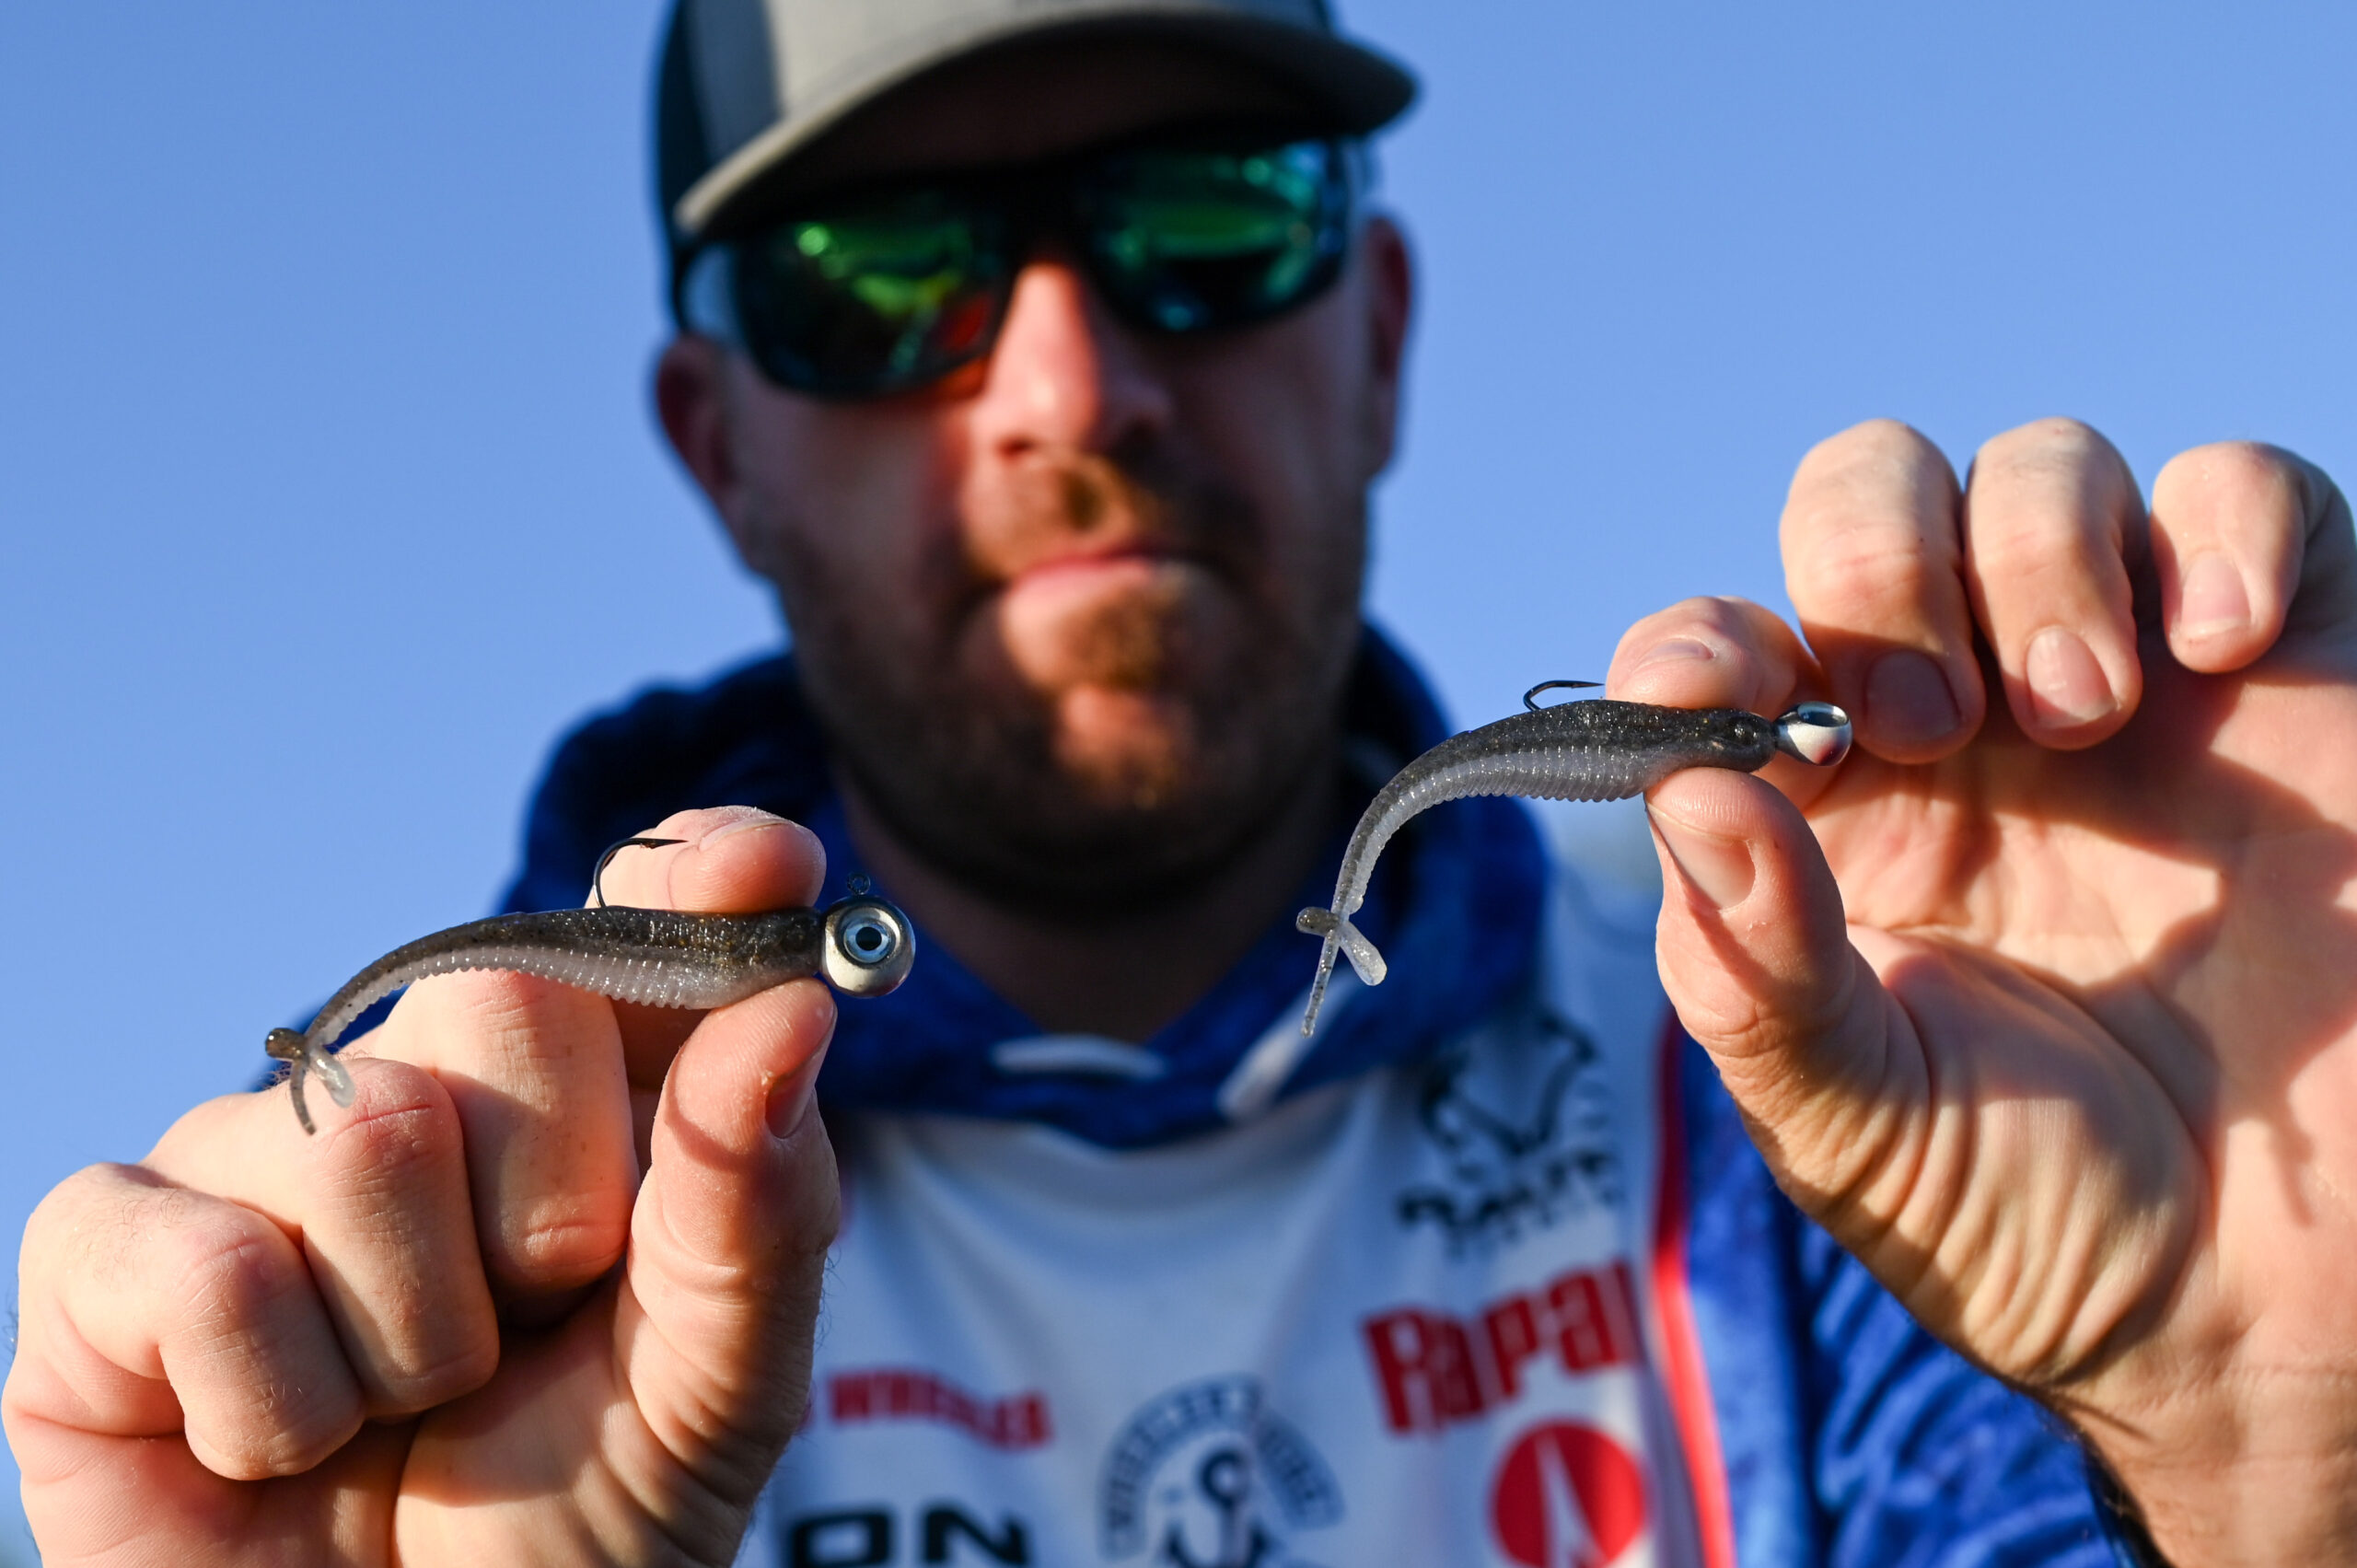 Everything you thought you knew about bass fishing … is wrong